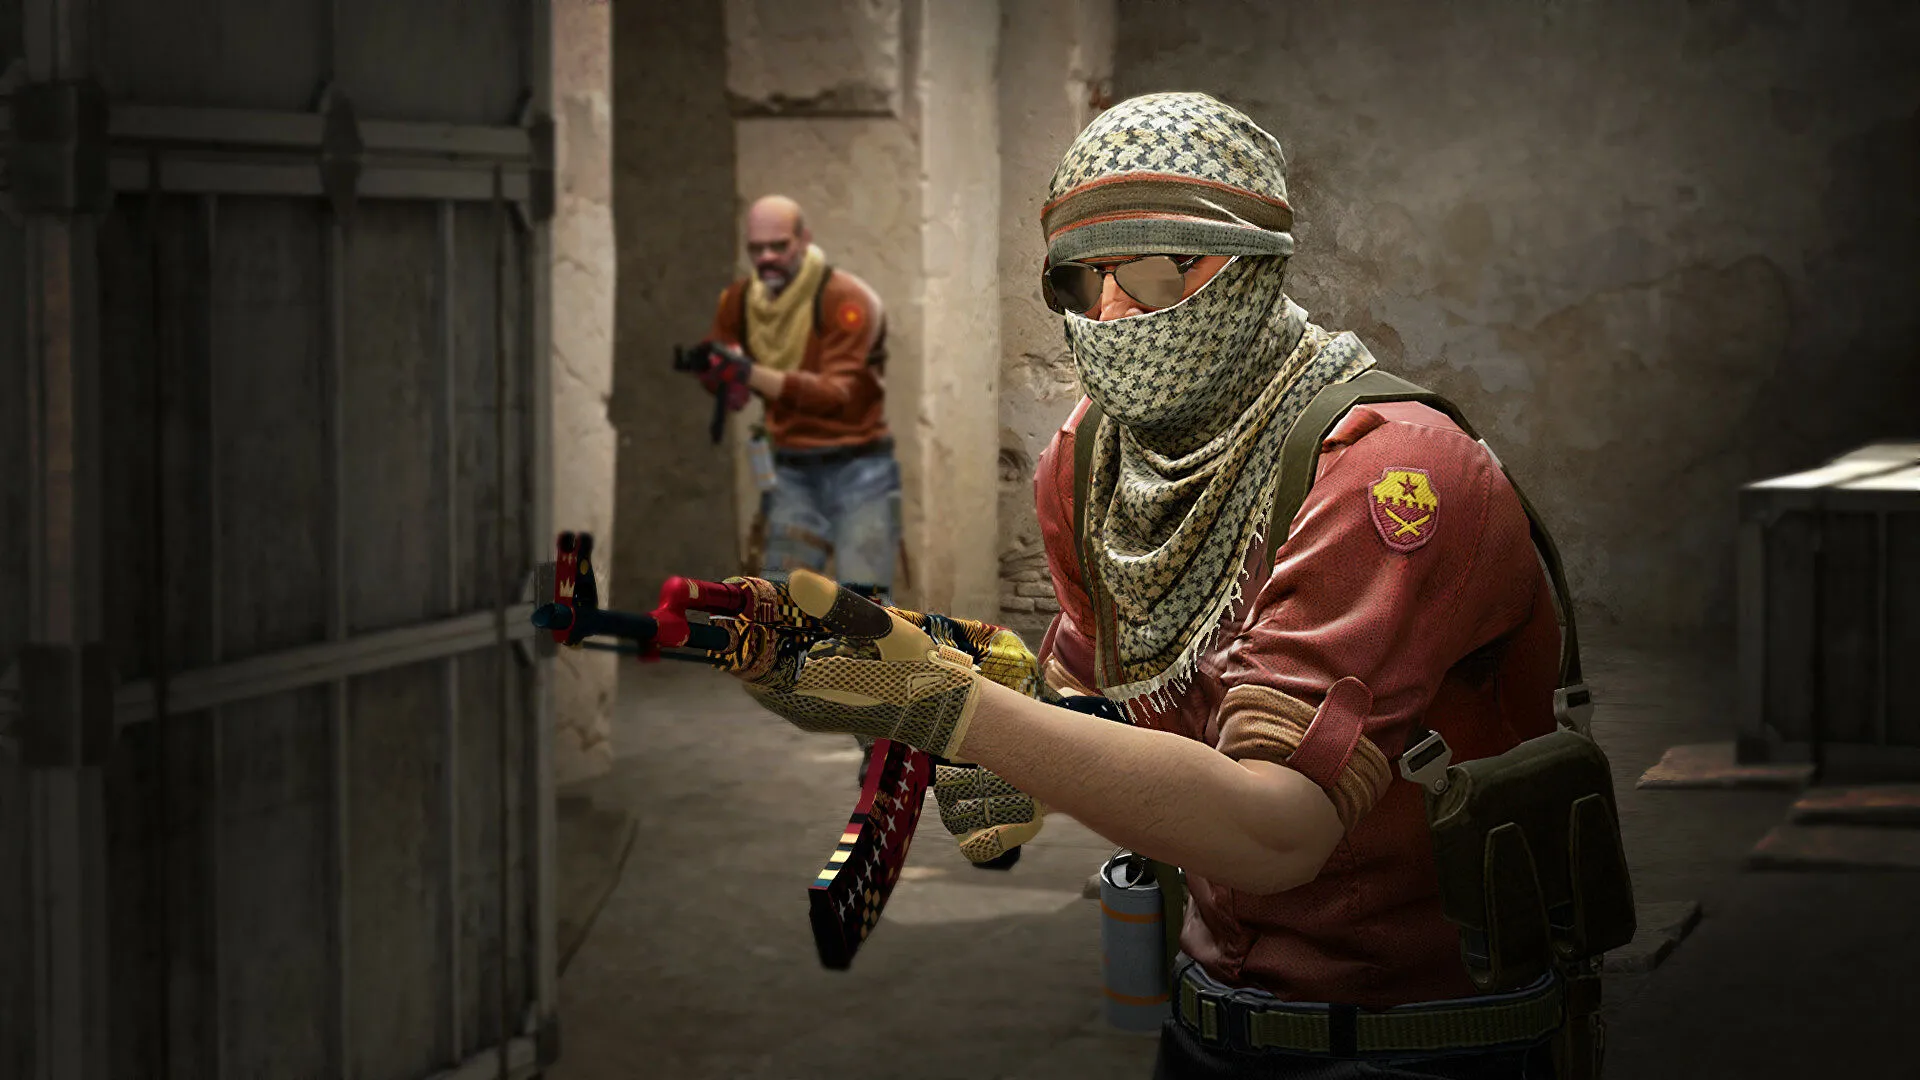 Source 2 Added To CS:GO Developer Pre-Release Branch, Leakers Speculate Release in Next Update